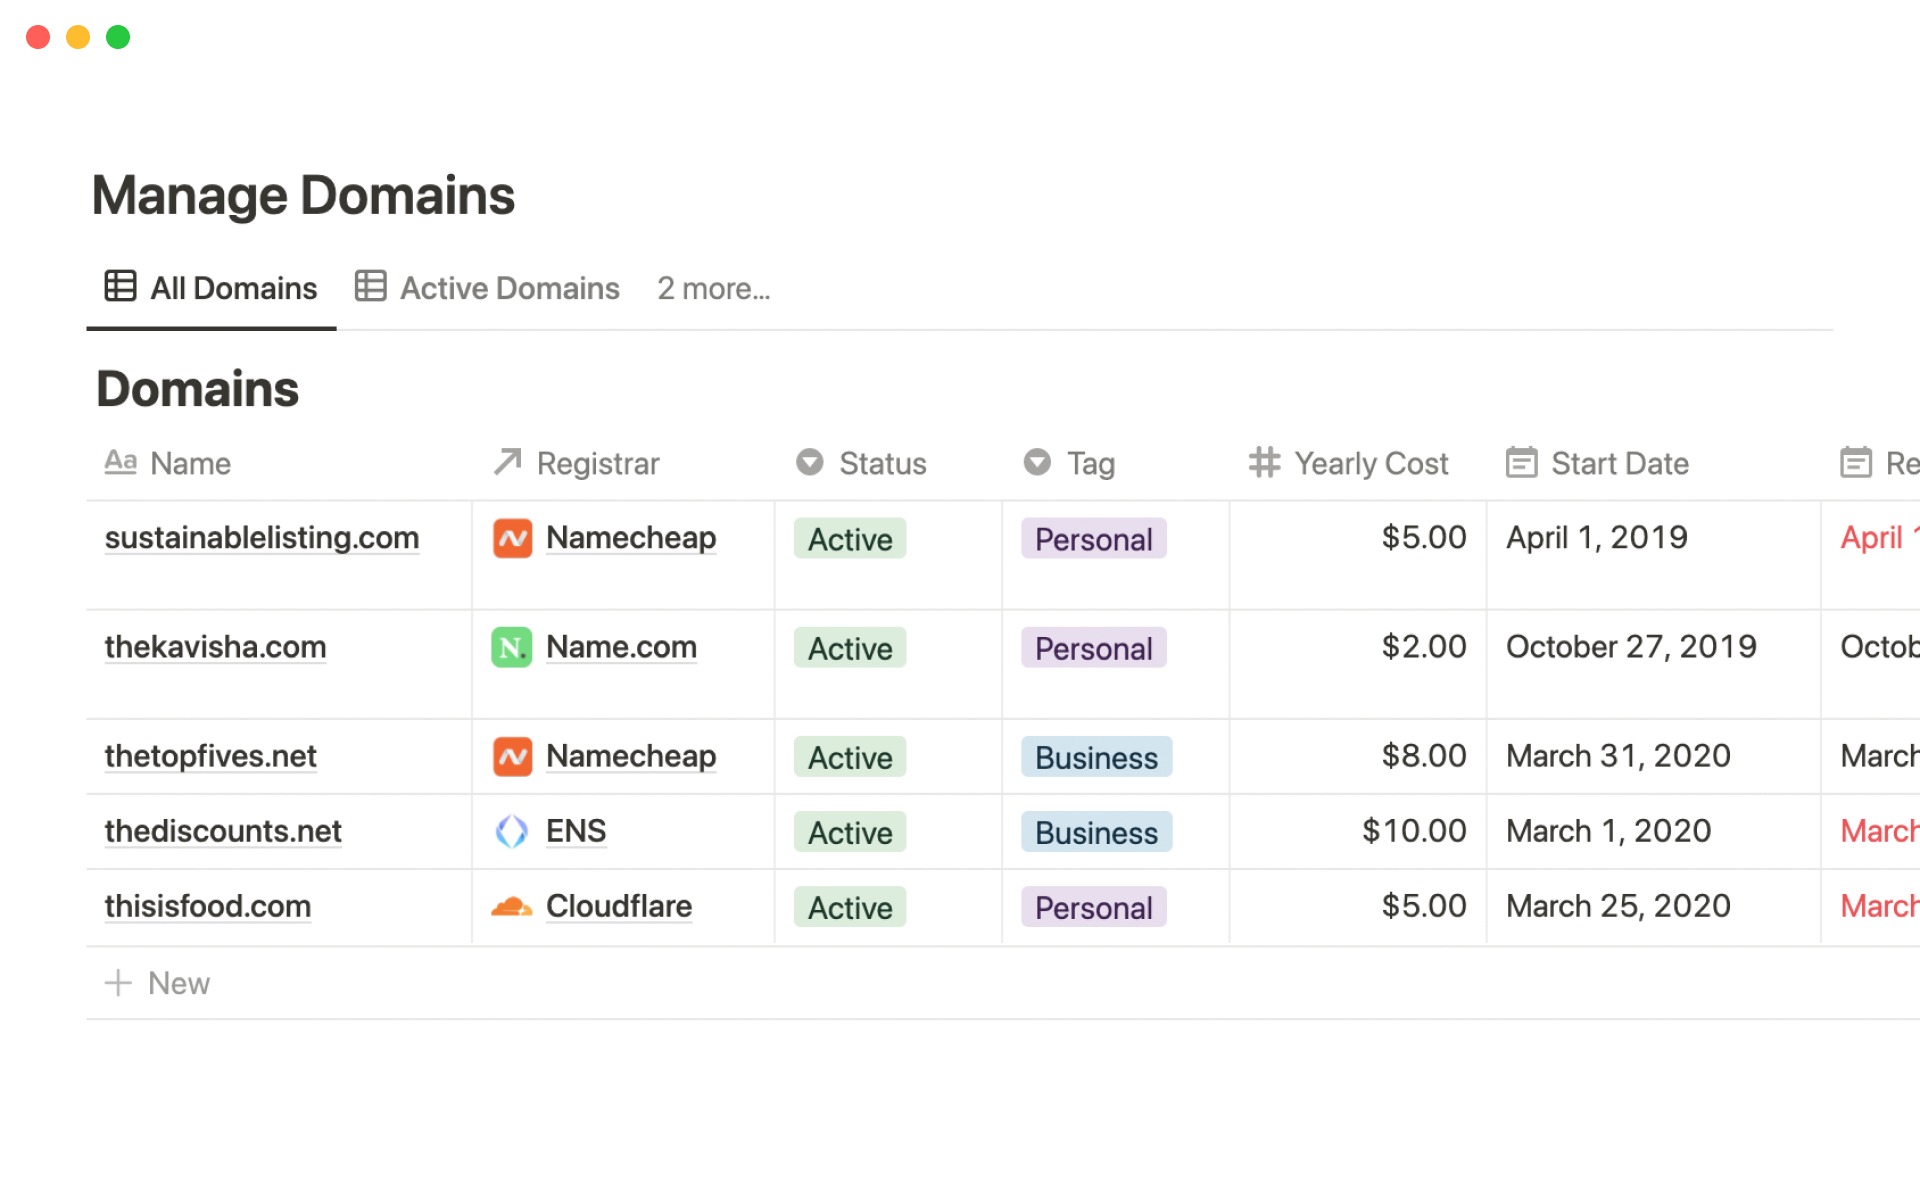 Track and manage all of your domains in a single place. Easily manage renewals and see all yearly costs.